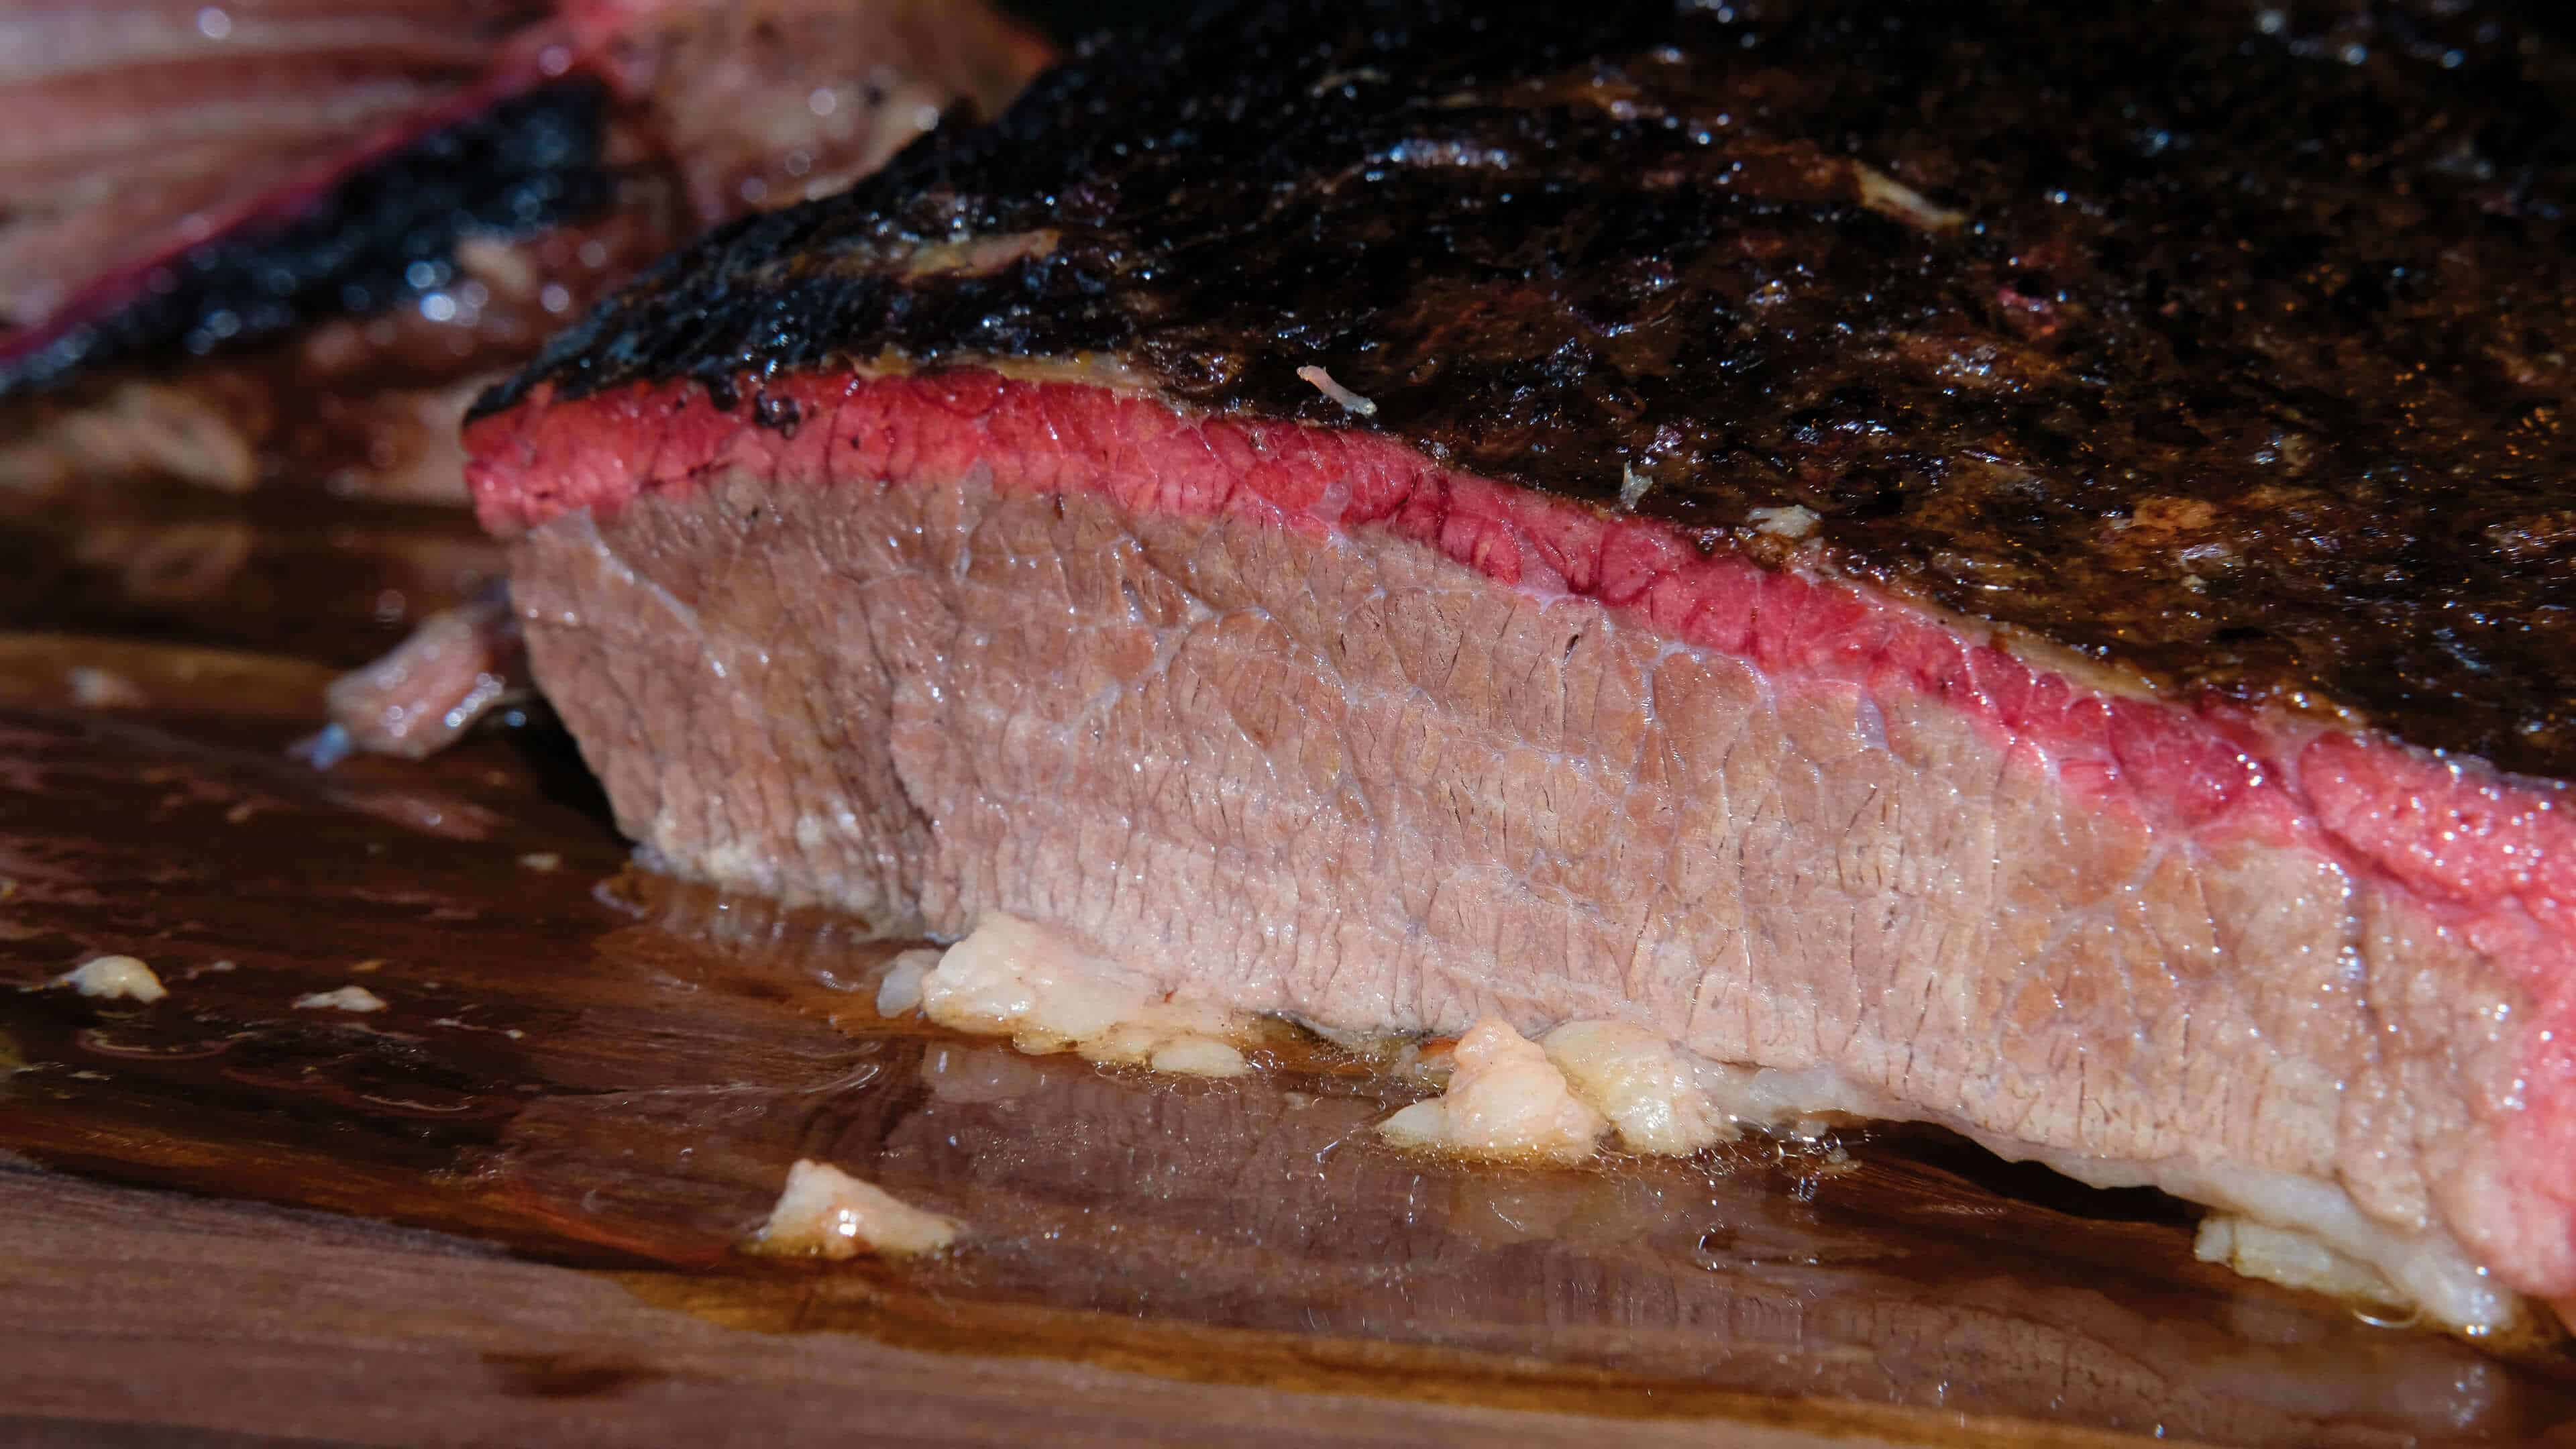 Or grill up some BBG beef brisket this holiday season